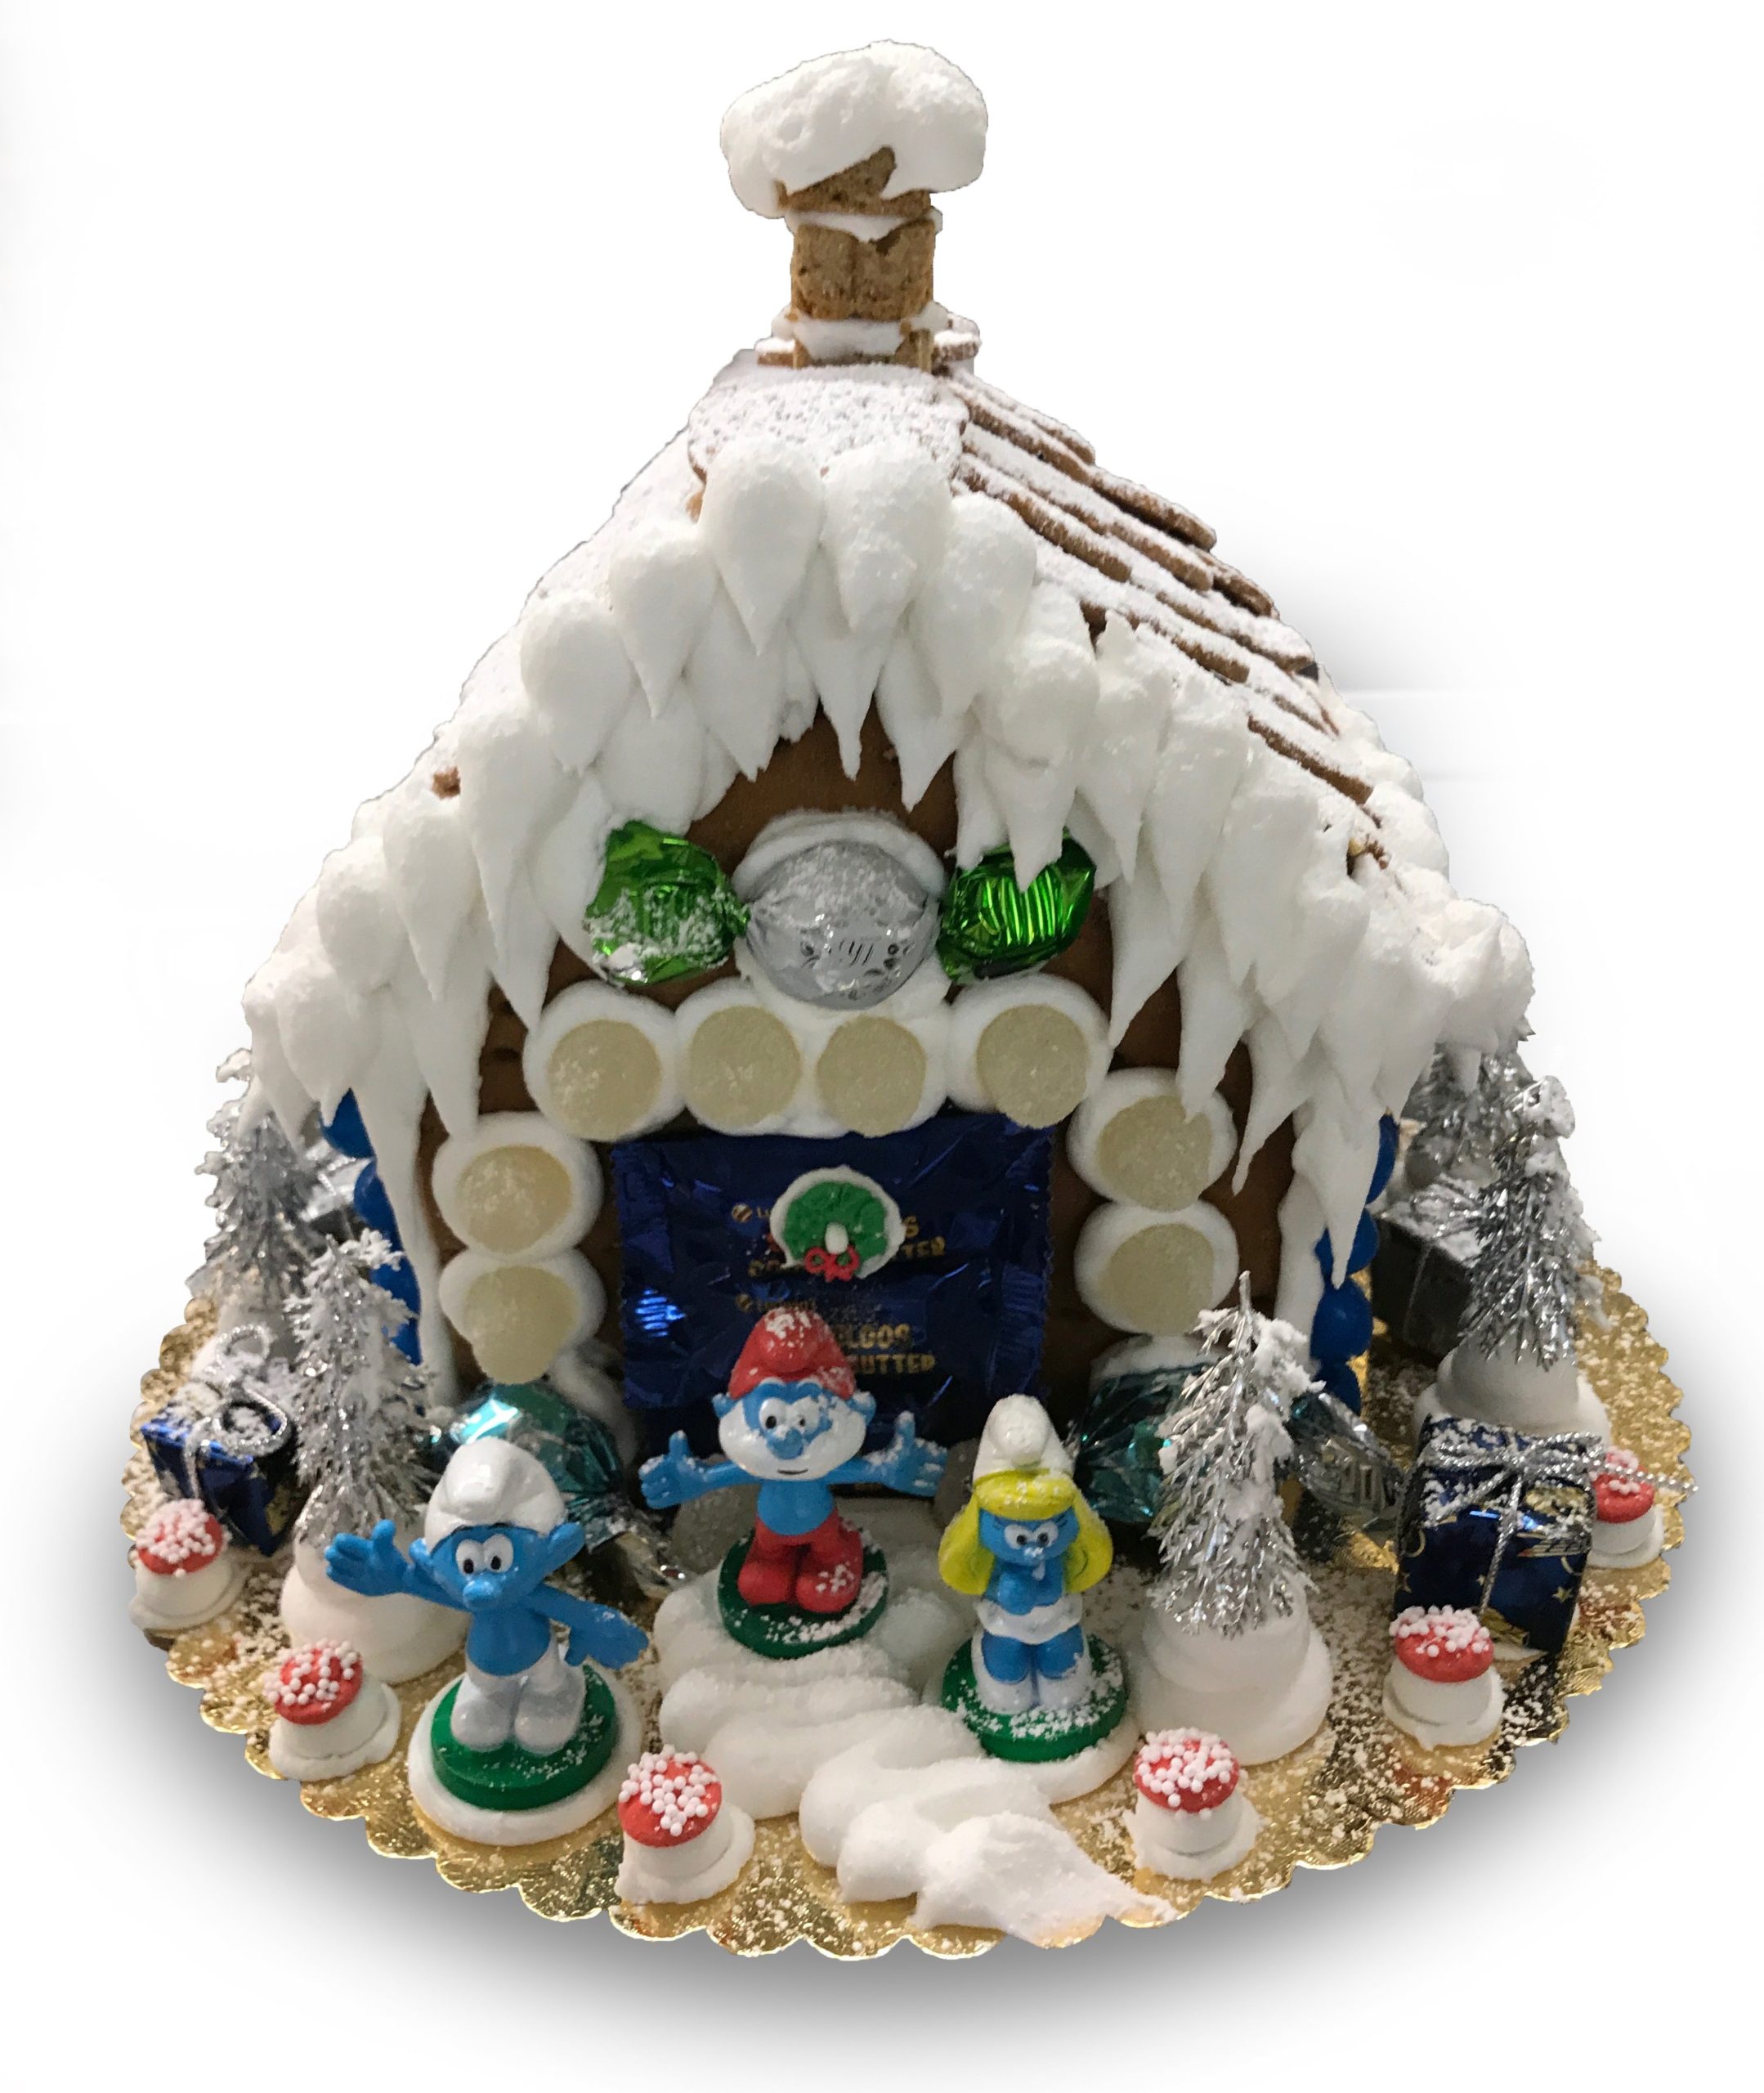 Small smurf gingerbread house